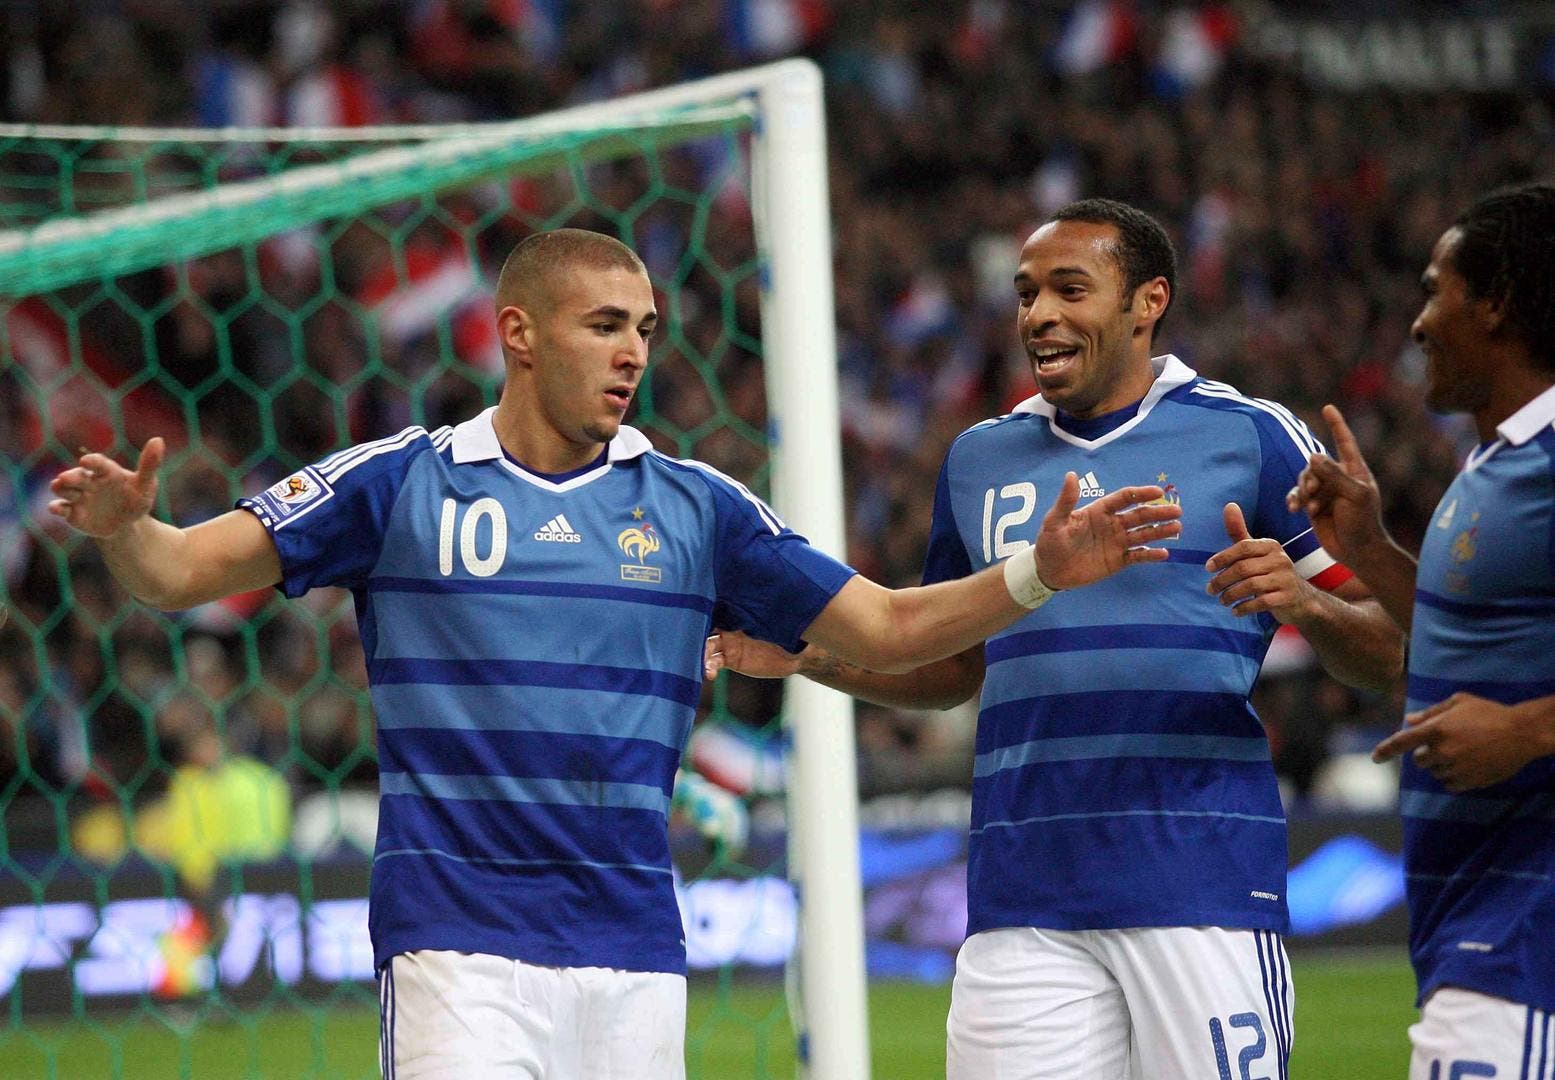 france thierry henry et le cas karim benzema prudence prudence iconsport lai141009 01 23170094